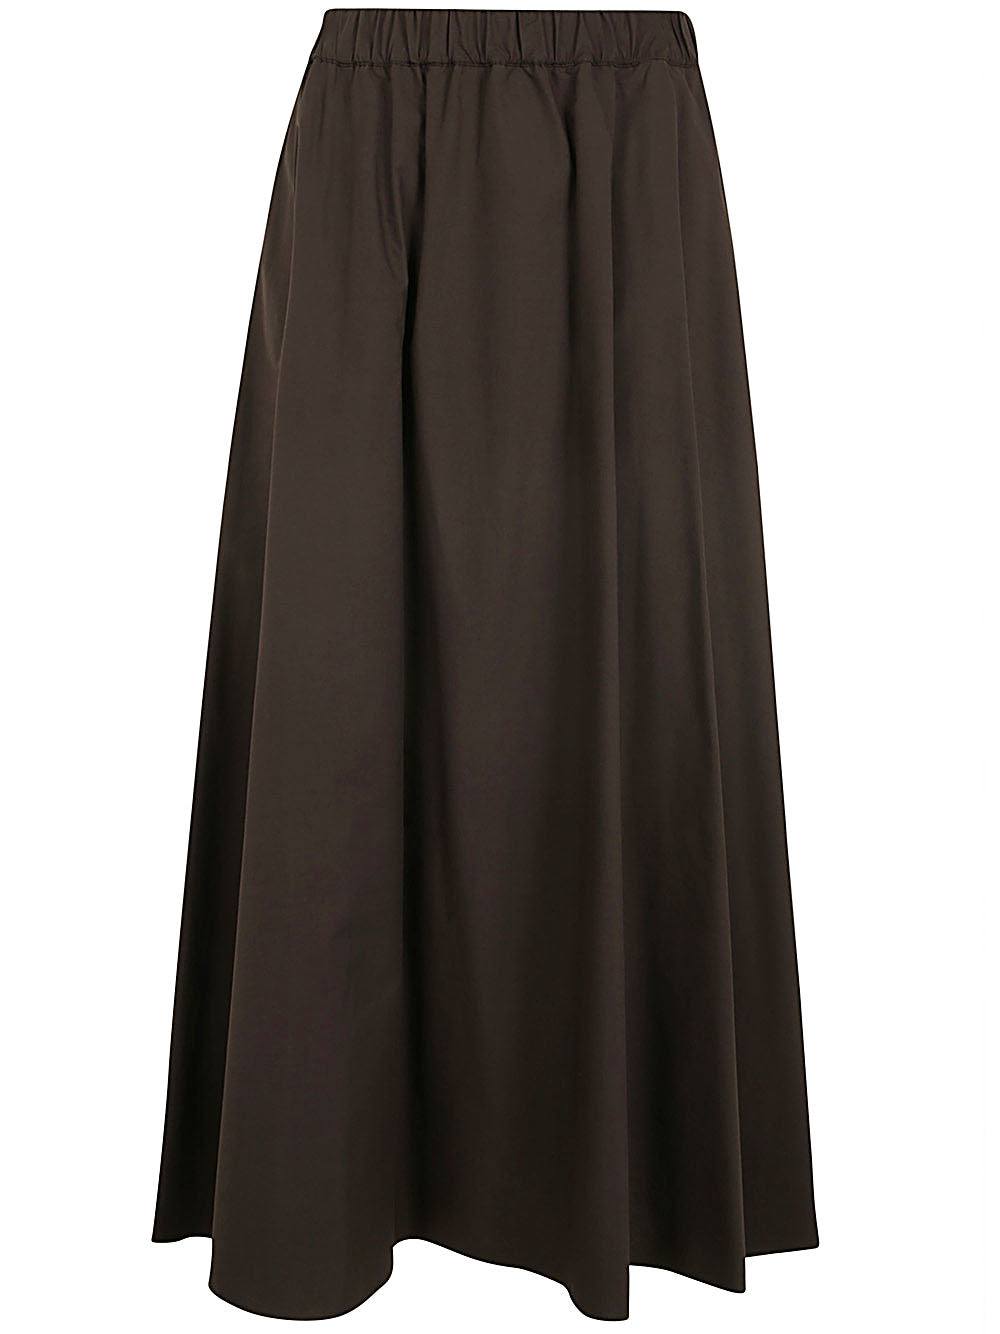 Long Skirt With Elastic Band